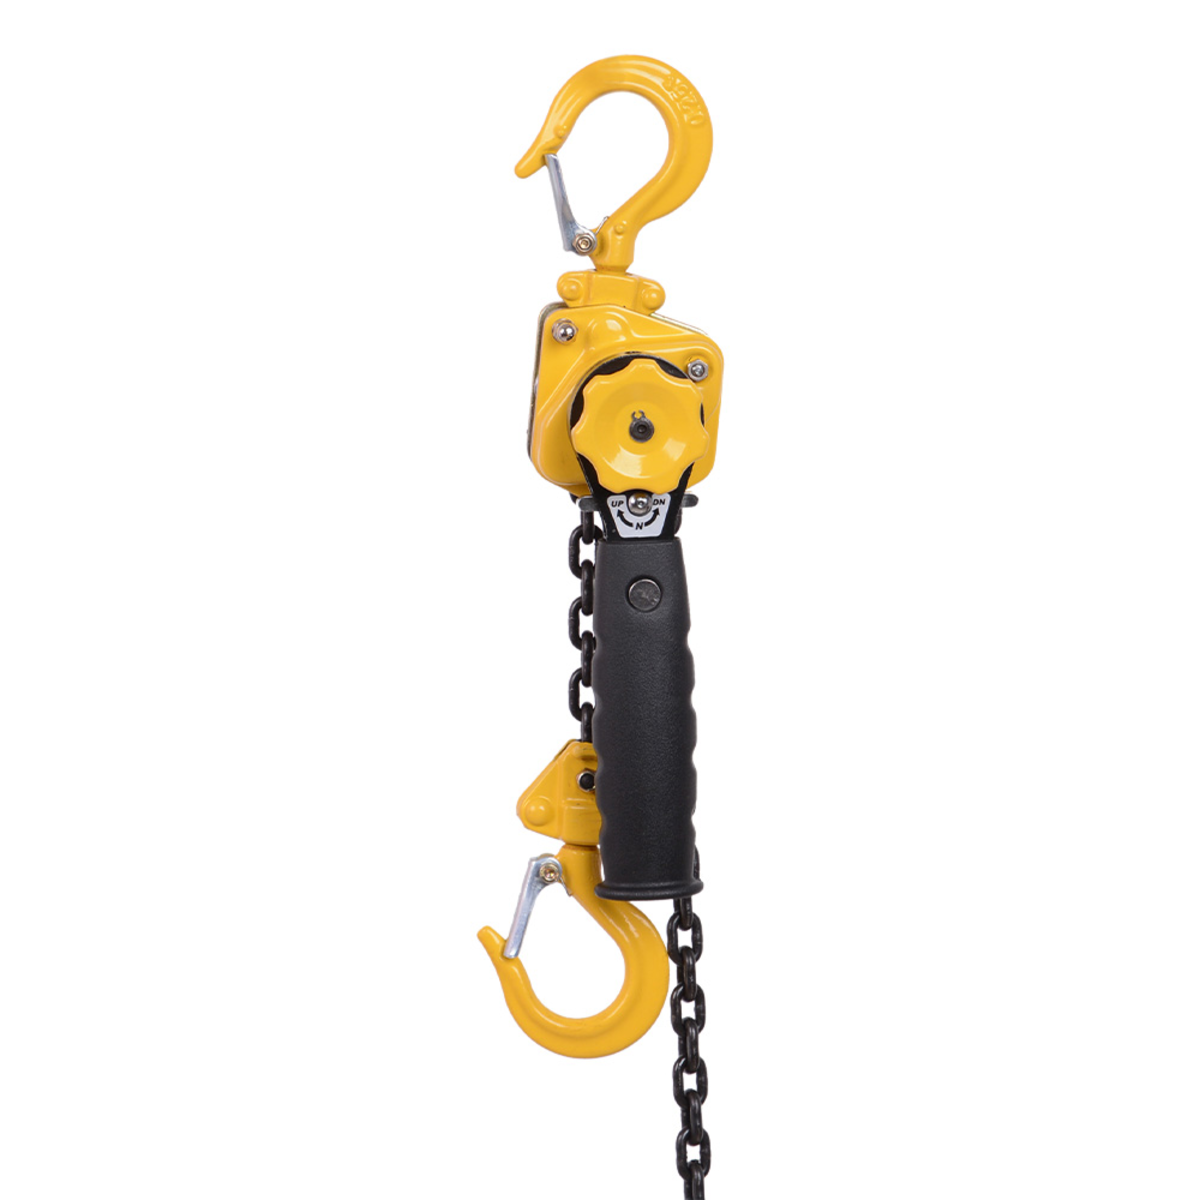 1 Ton Chain Hoist with 30 ft. Chain Fall and overload protection